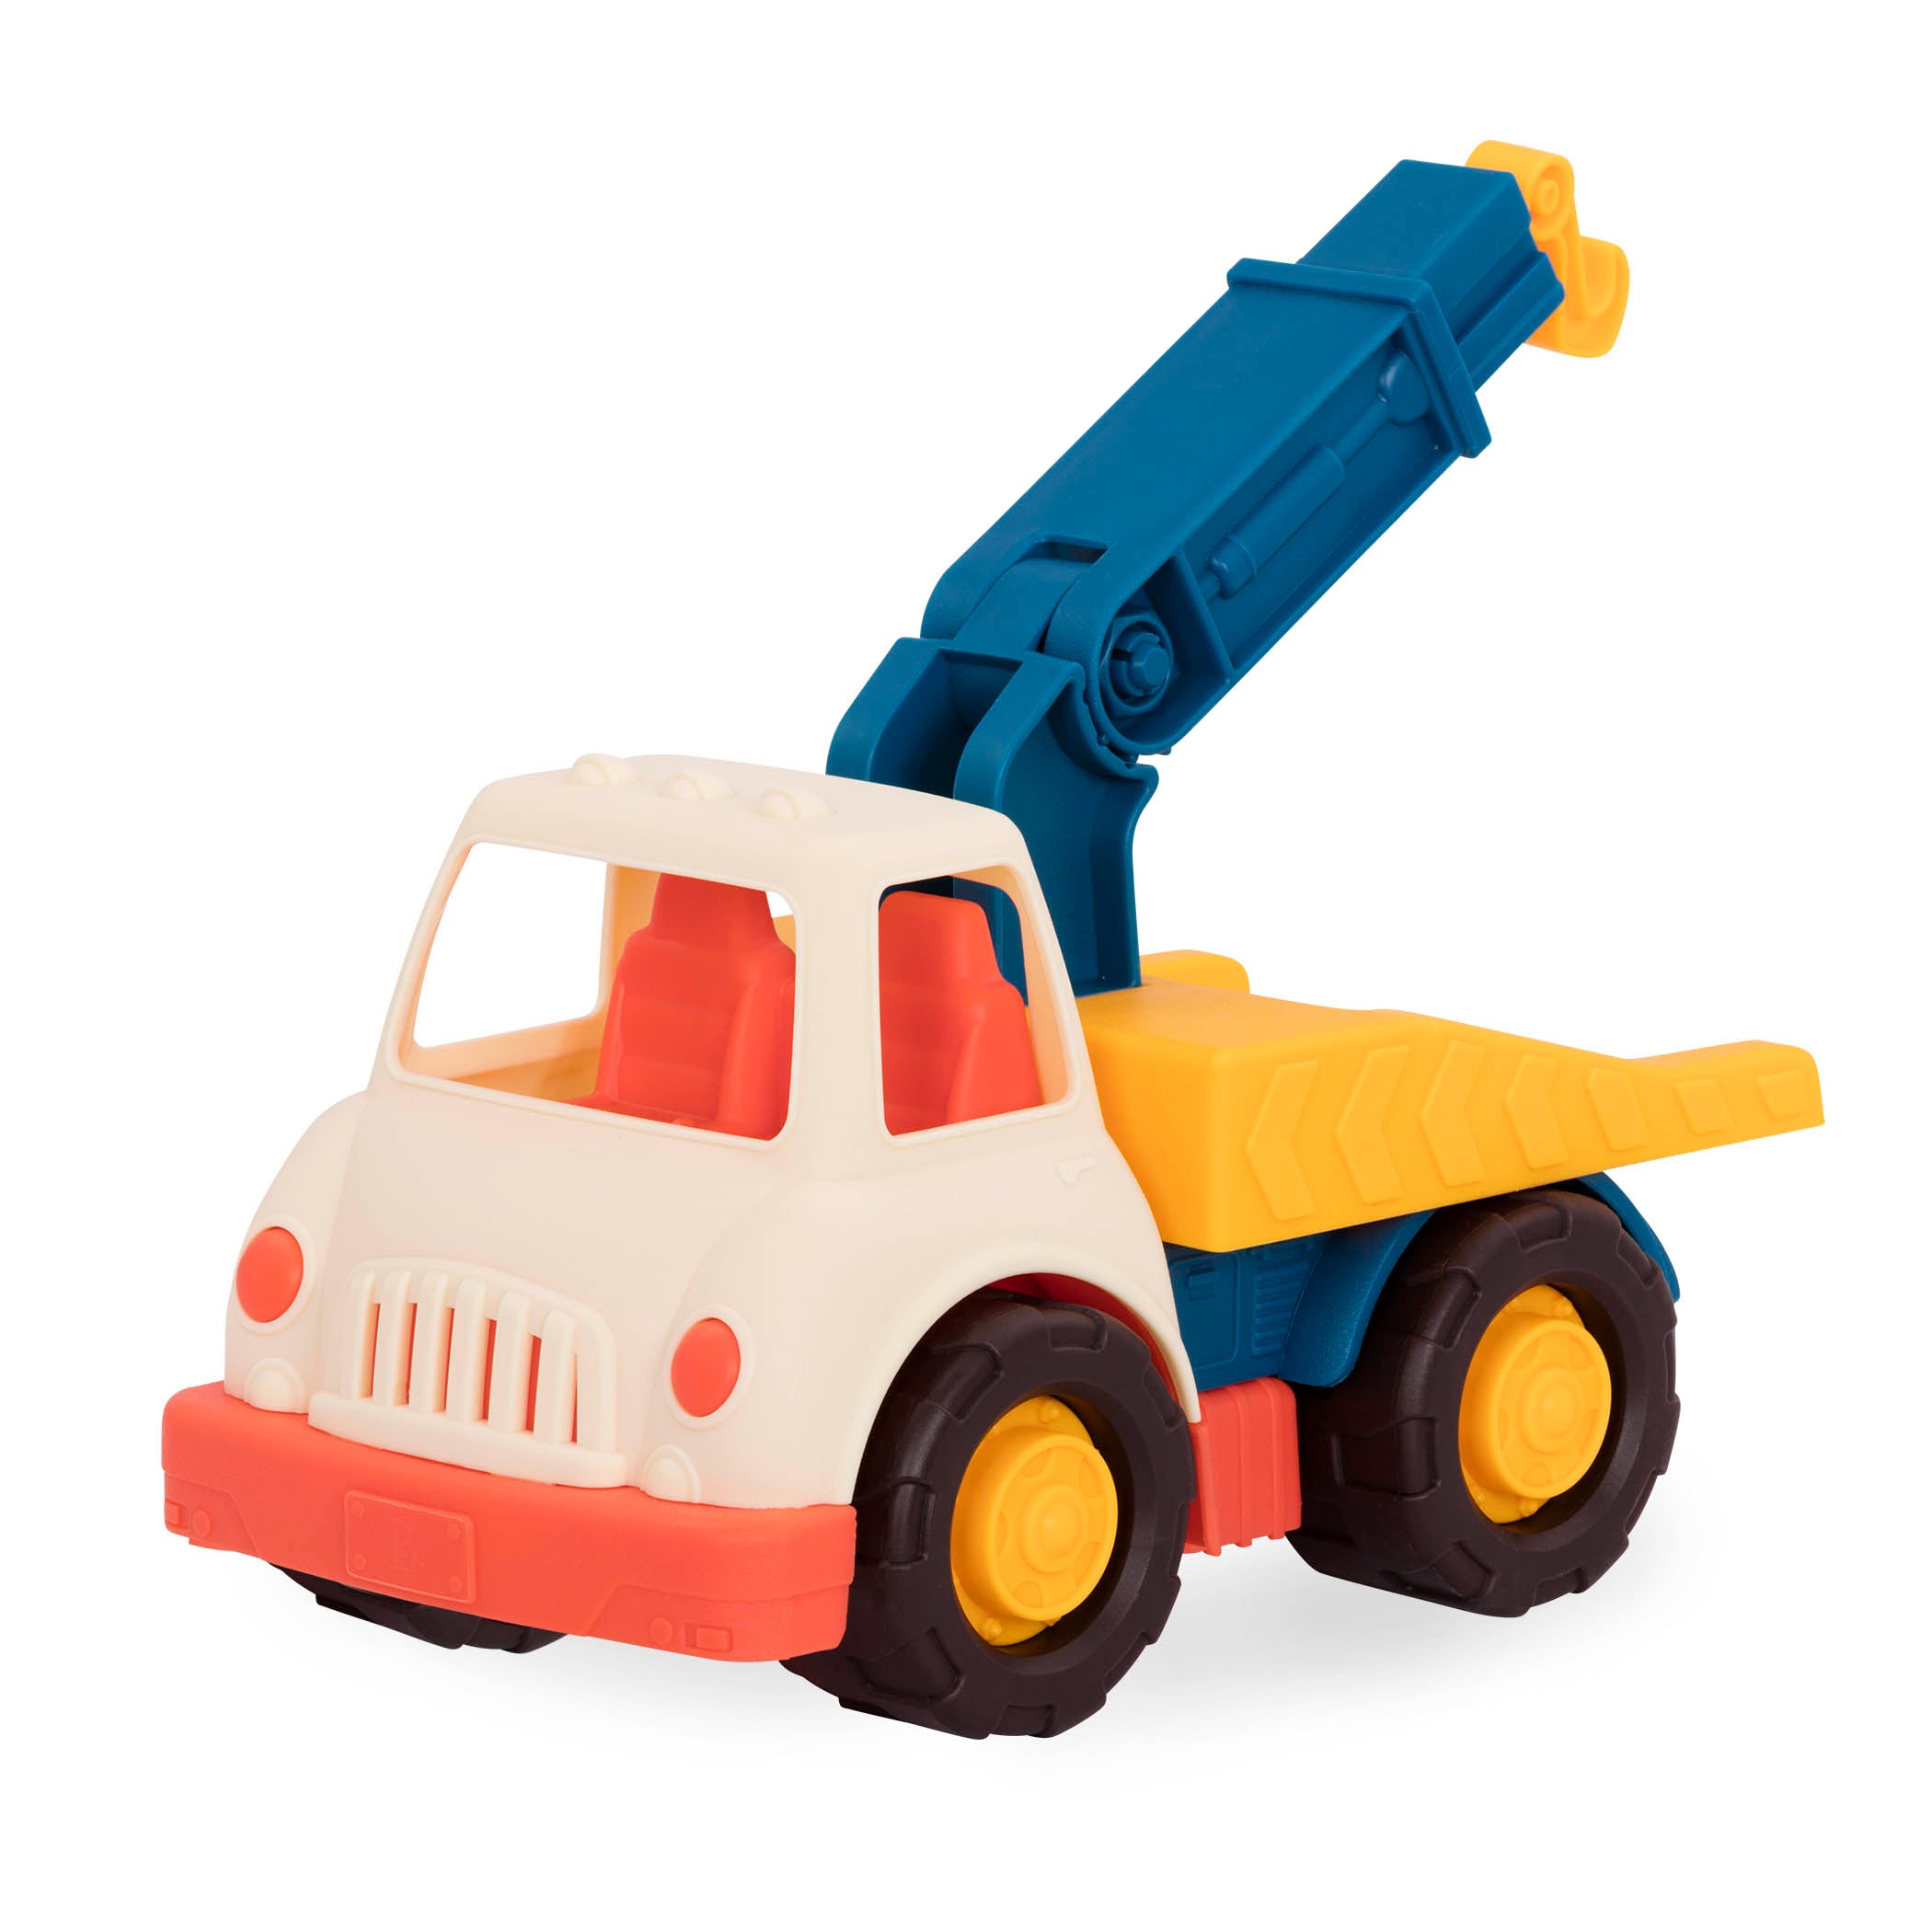 Toy tow truck.